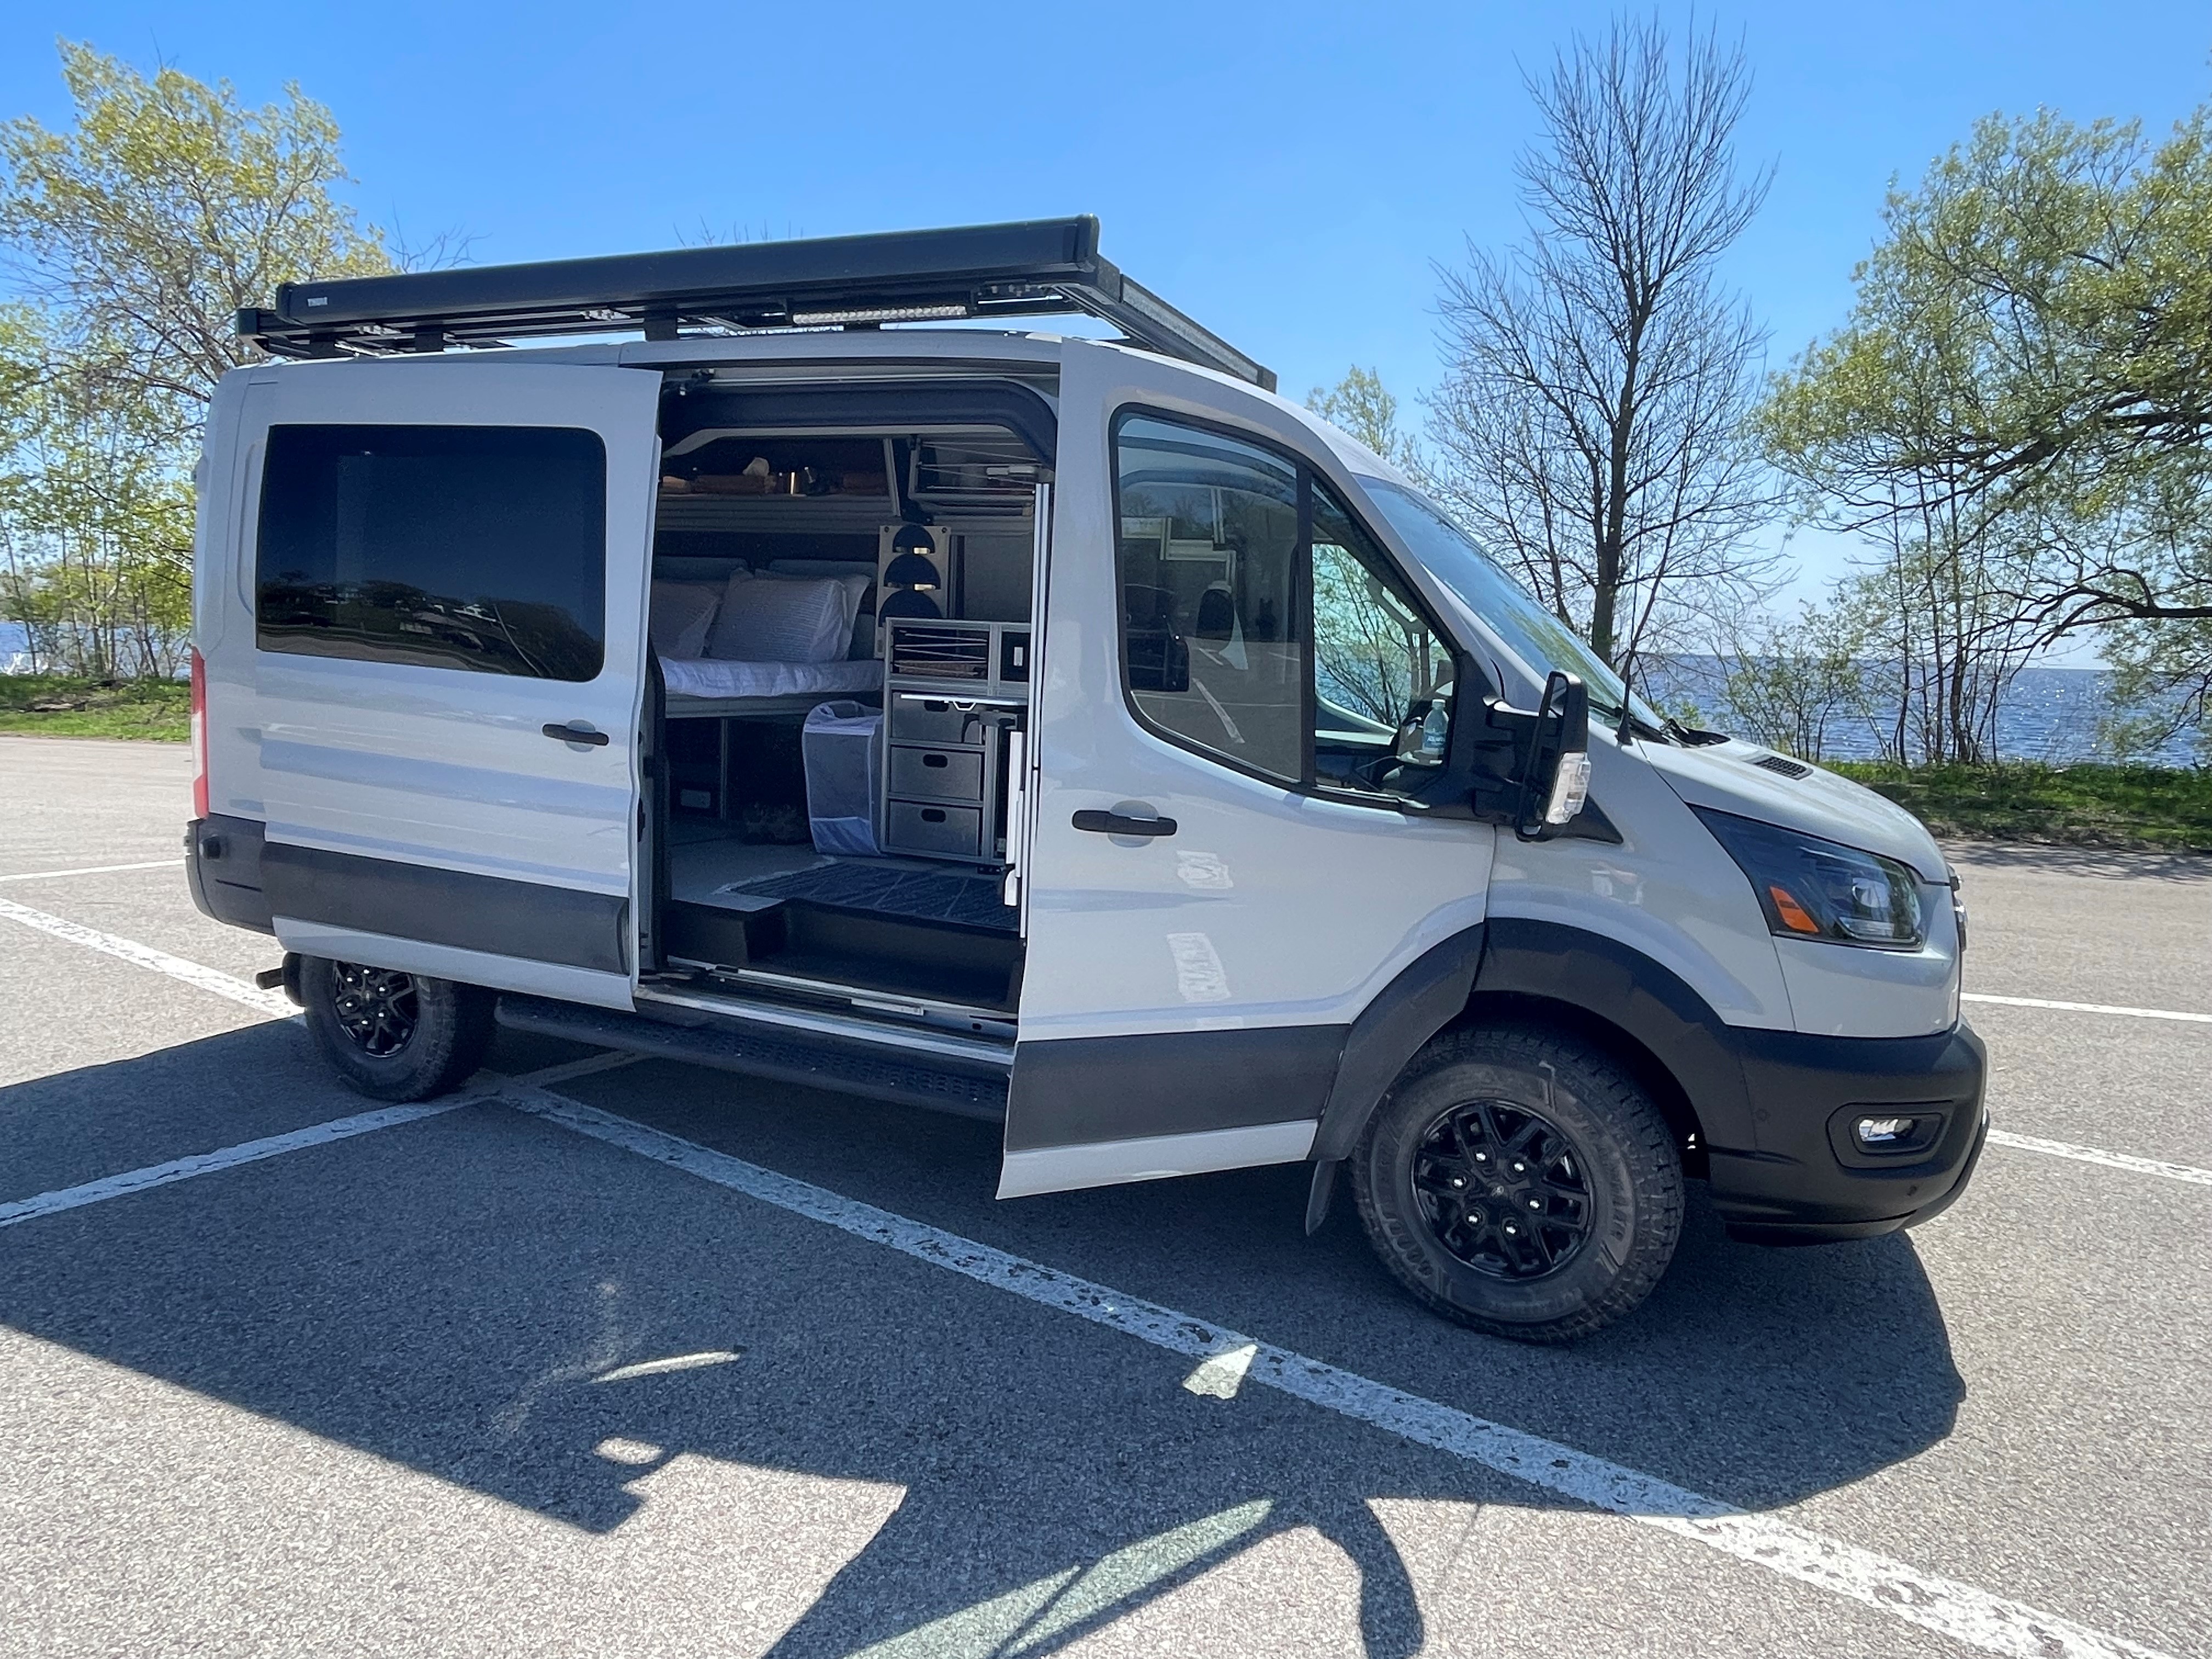 Ford launches Transit Trail camper van with a tour of the UP